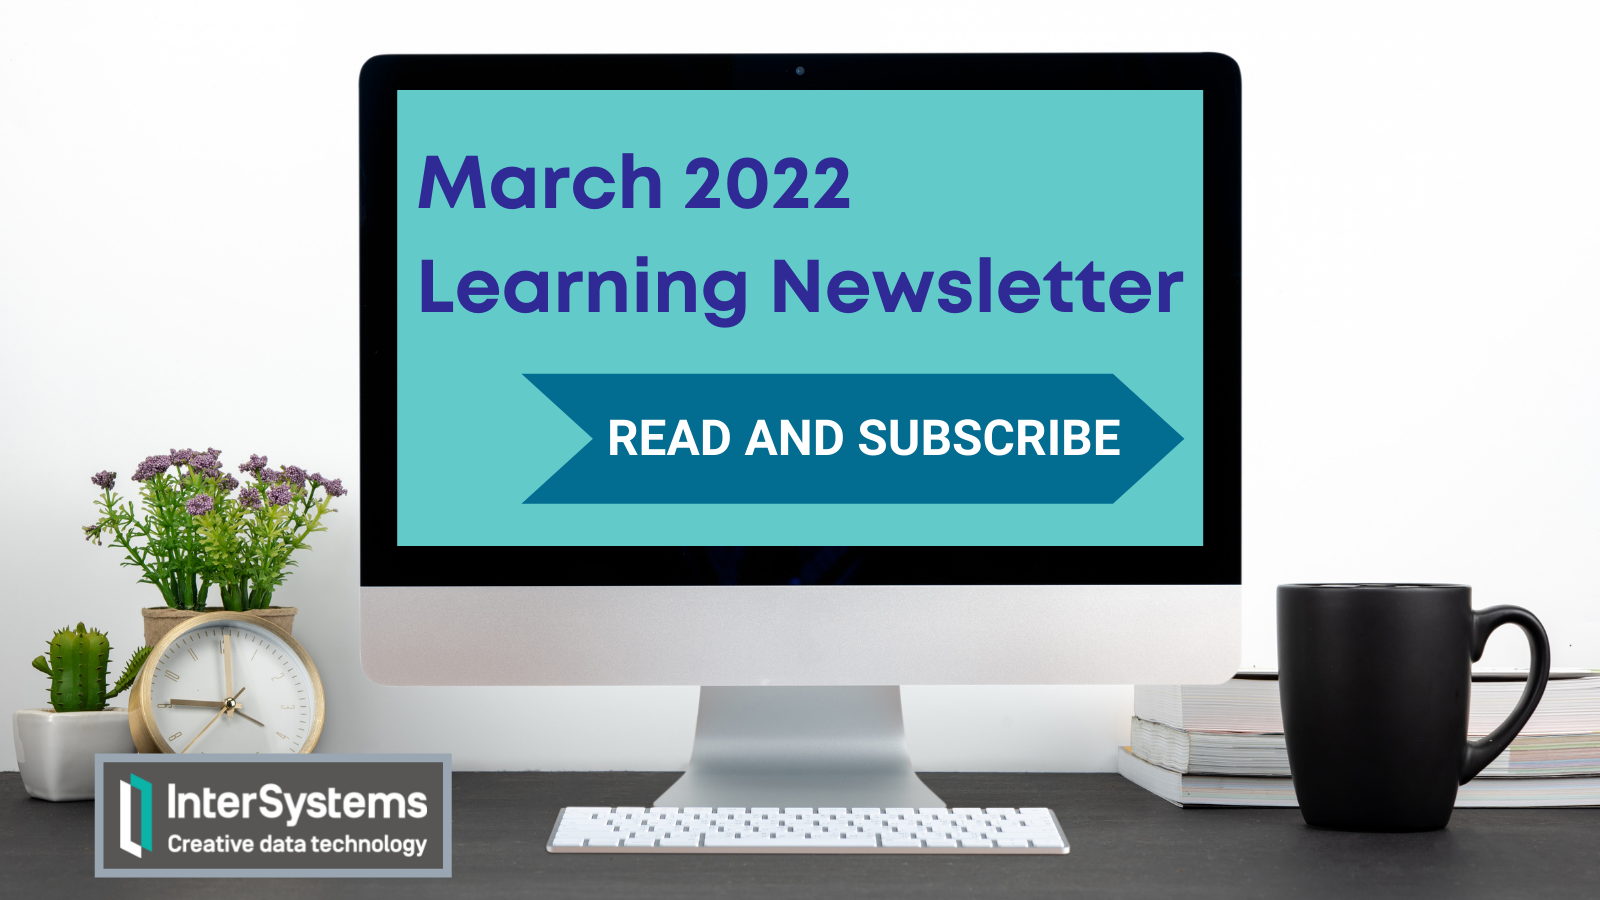 March 2022 Learning Newsletter: Read and Subscribe